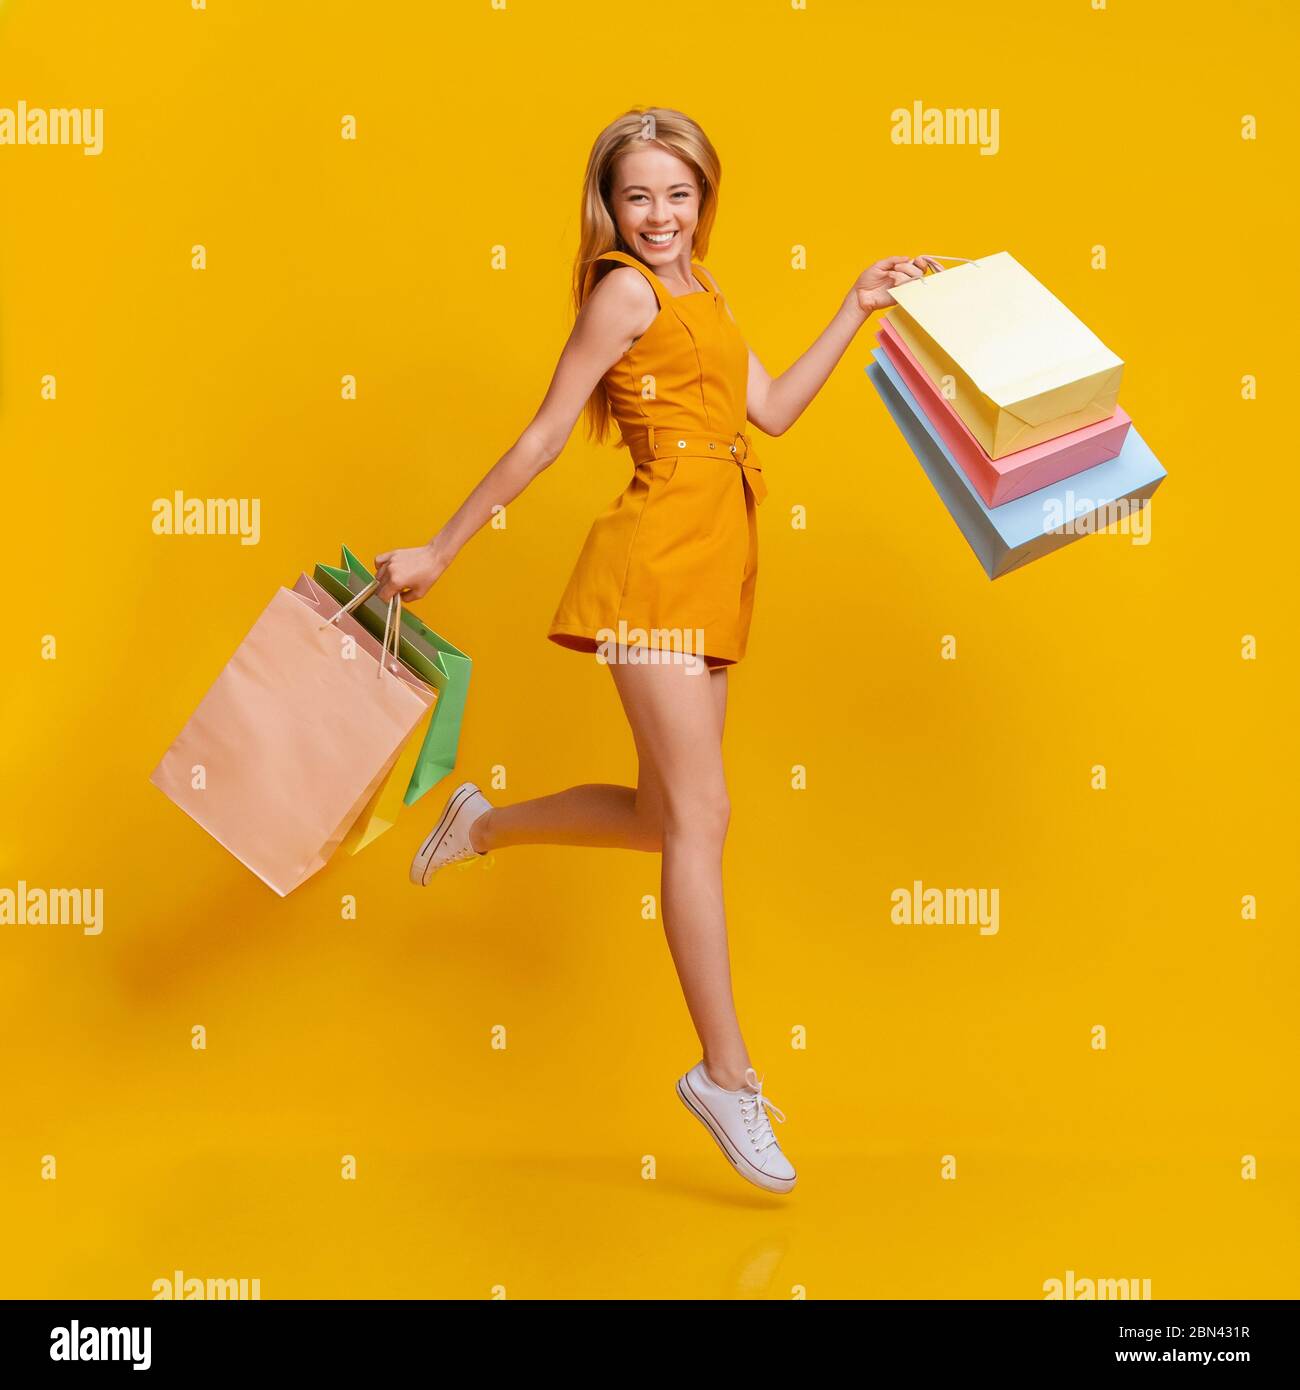 Seasonal Sales. Beautiful Shopaholic Young Girl Jumping With Shopping Bags In Hands Stock Photo